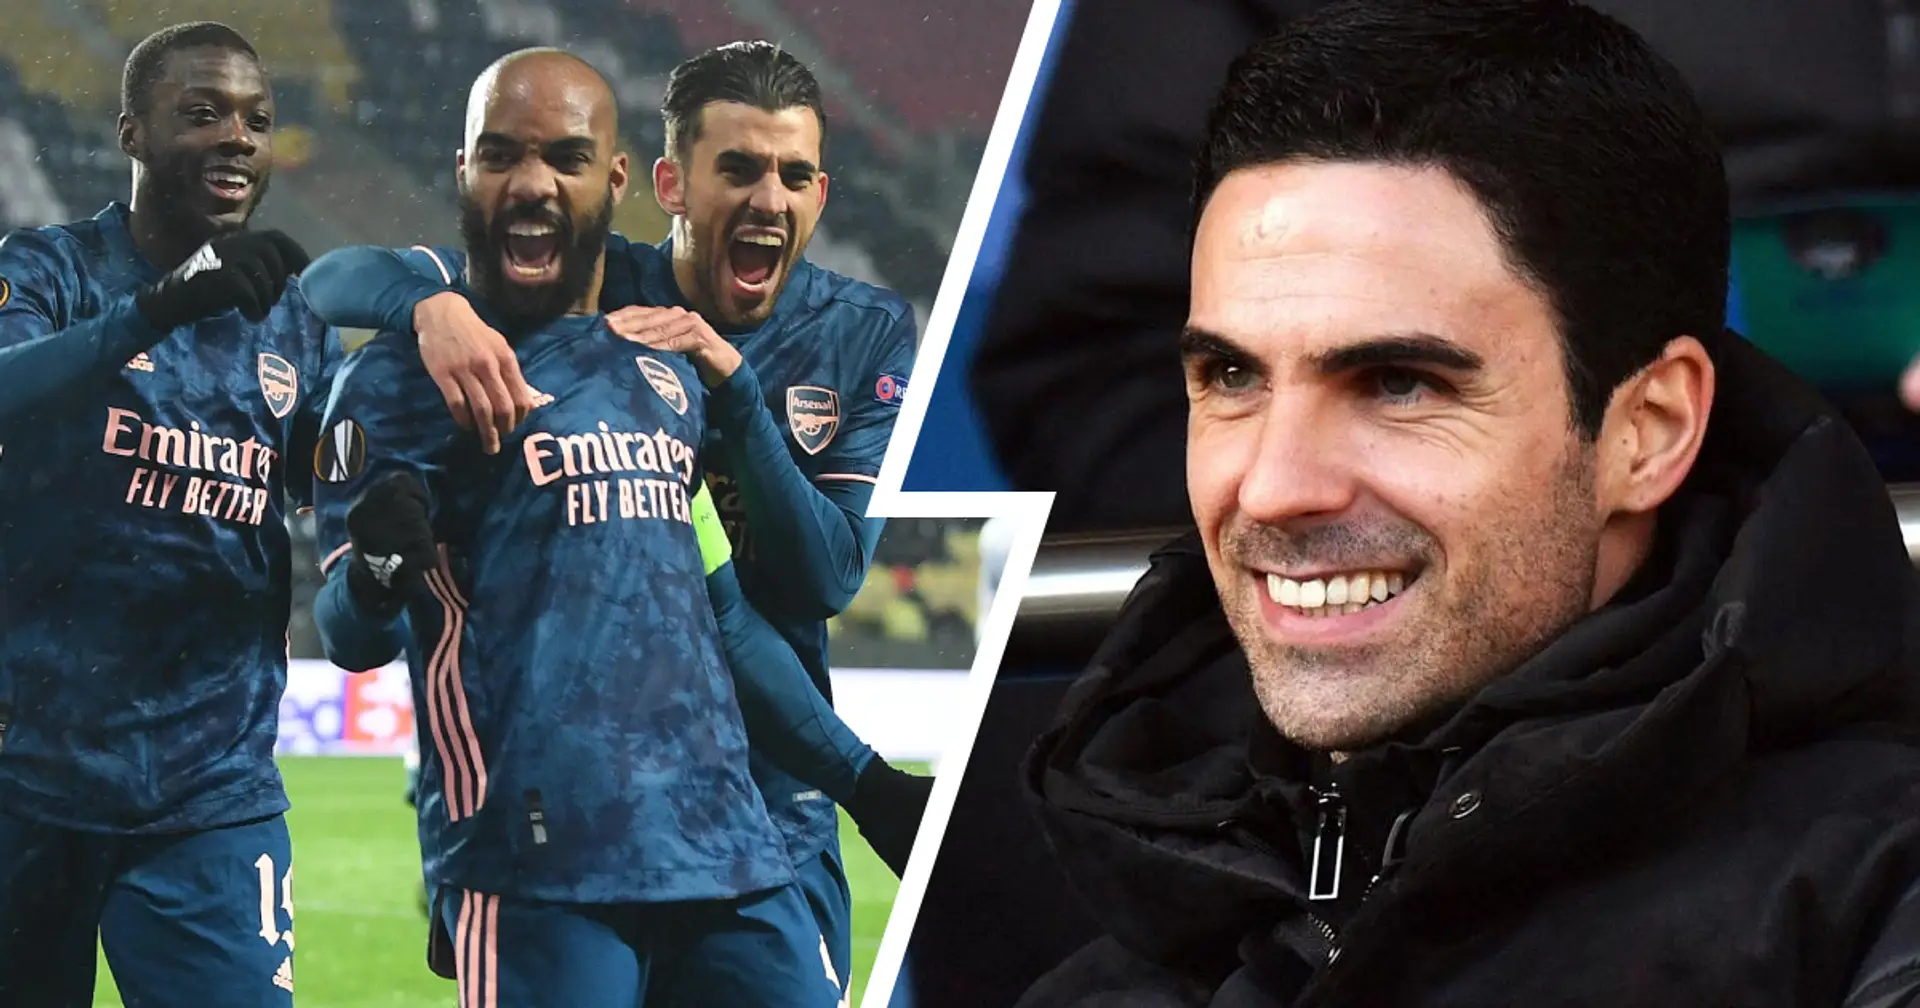 Key change in formation, Pepe's inclusion & more: Assessing Mikel Arteta's decisions in epic Slavia Prague win